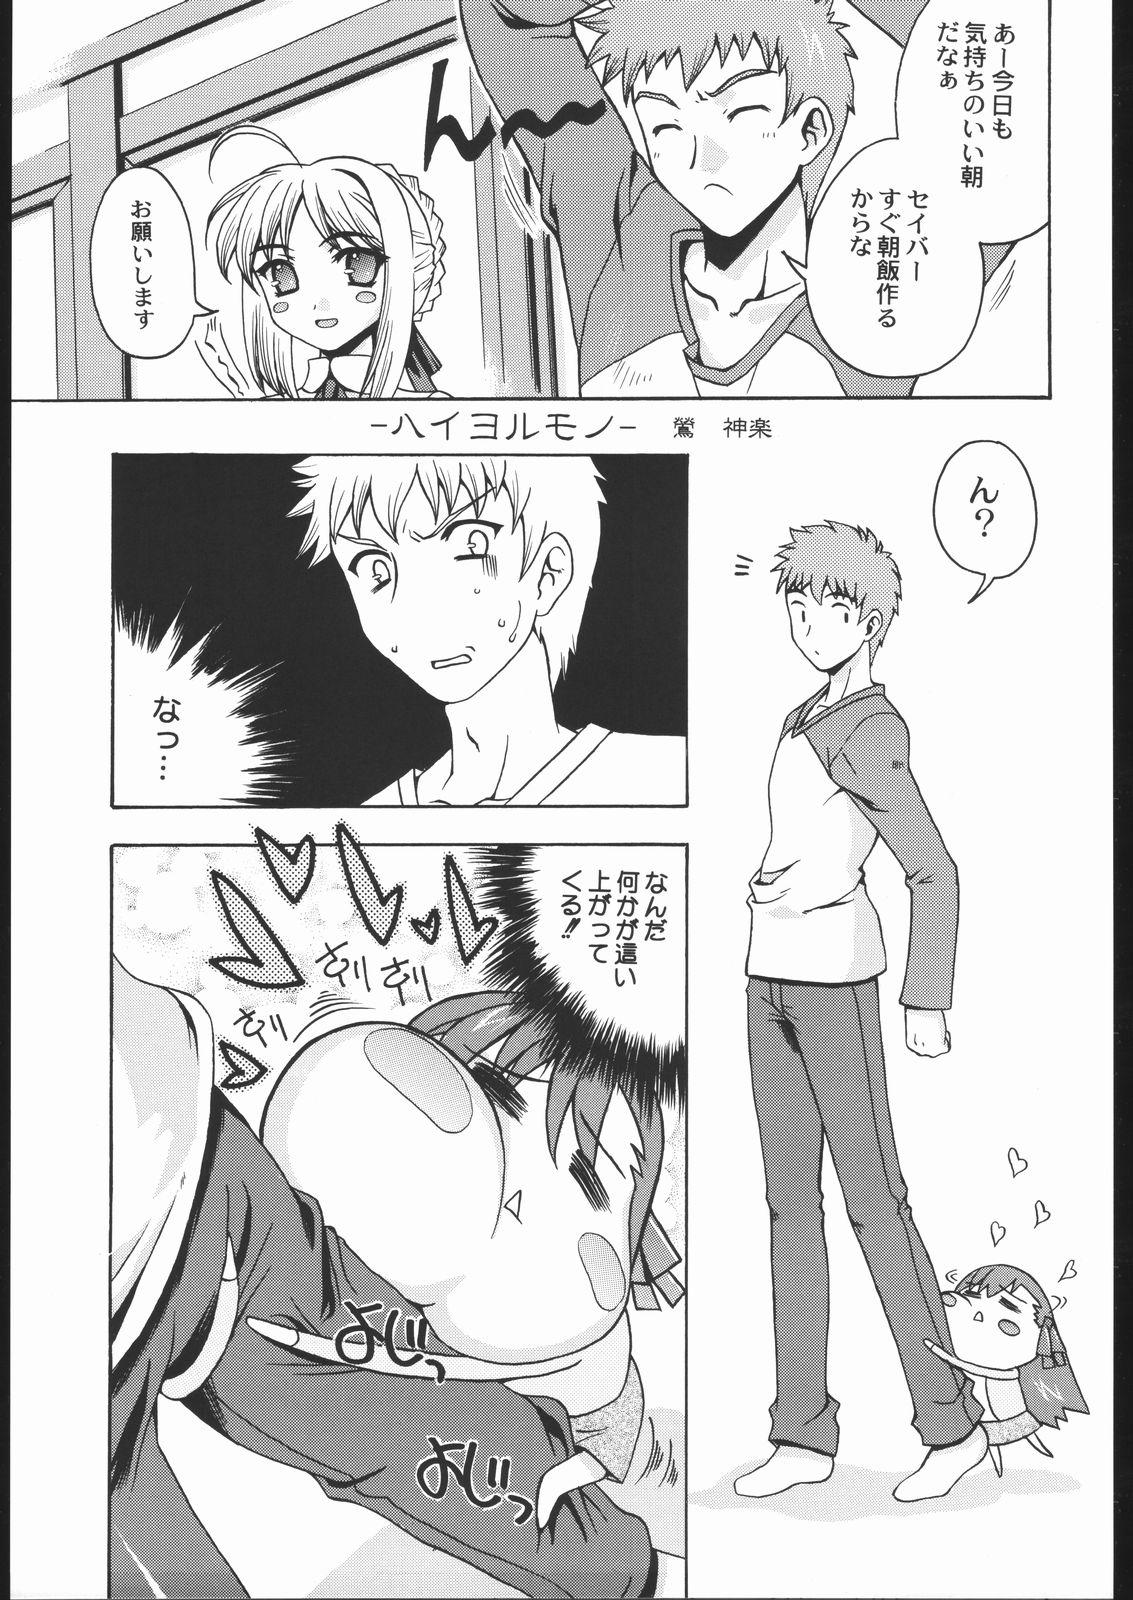 Toys Going My Way - Fate stay night Cumfacial - Page 4